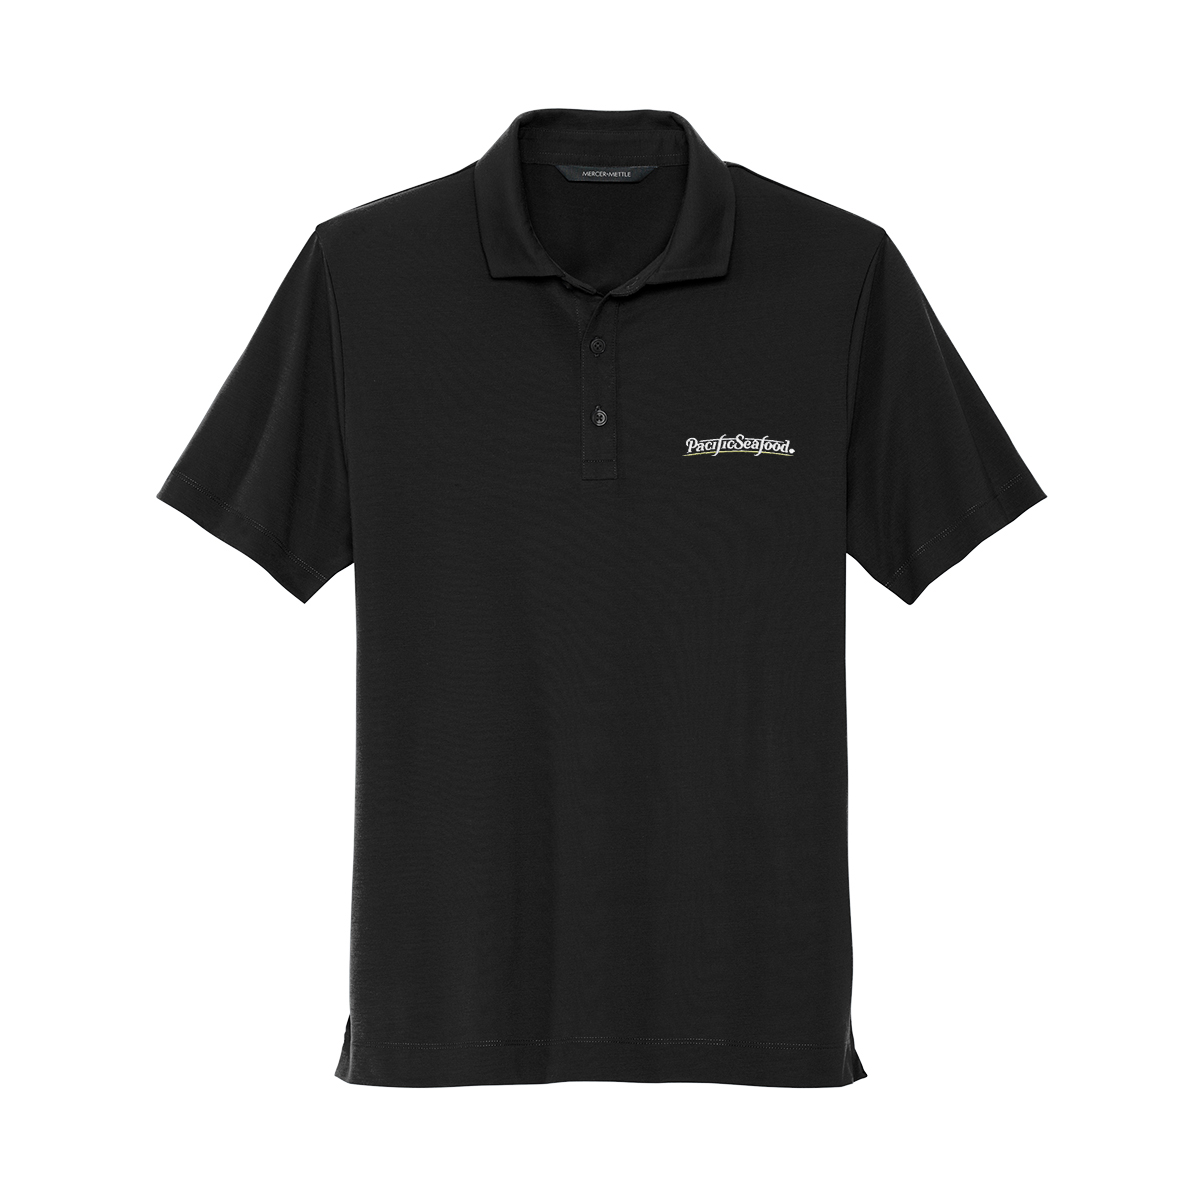 Mercer+Mettle™ Stretch Jersey Polo | Pacificseafood: Corp